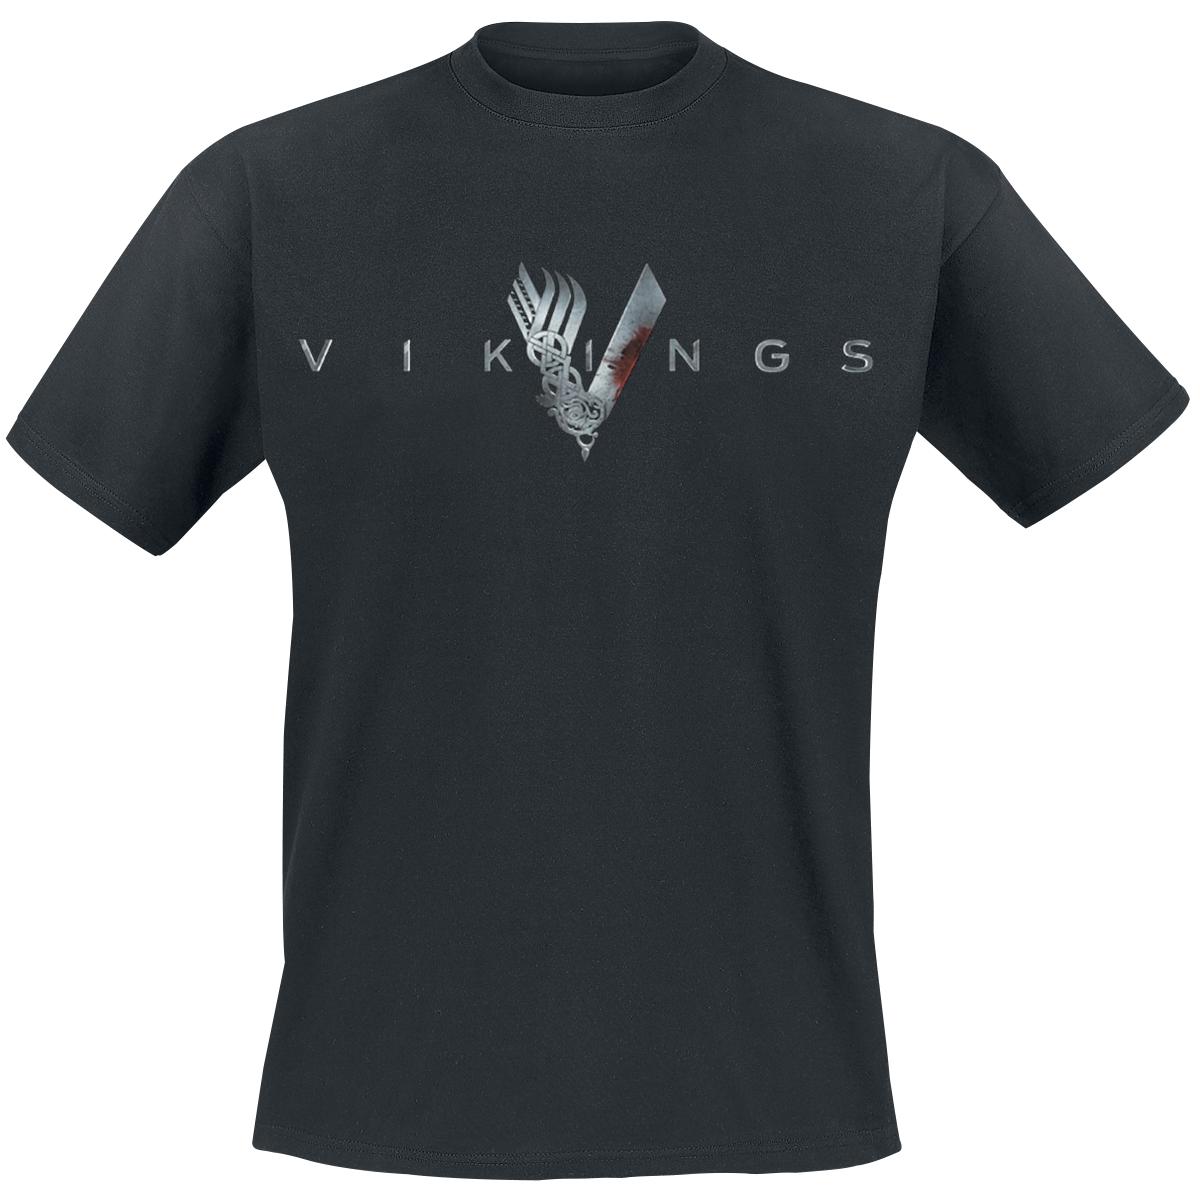 Welcome To Valhalla tee